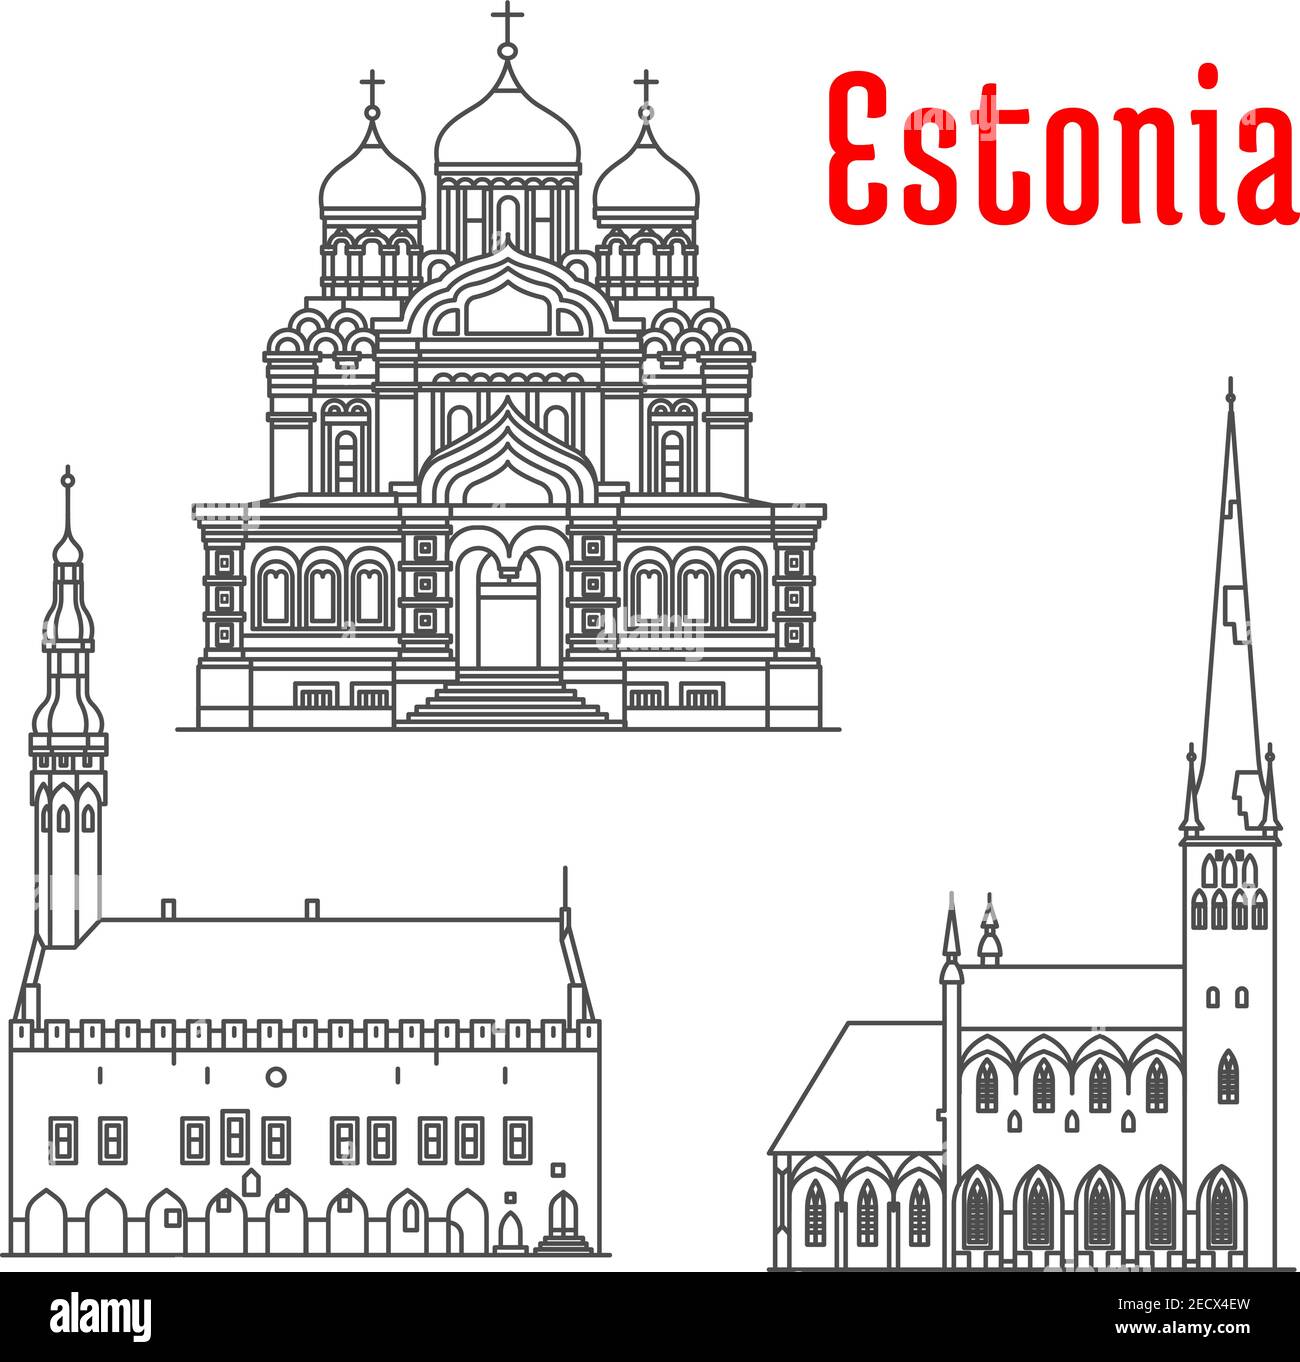 Estonia historic architecture landmarks, sightseeings, famous showplaces. Alexander Nevsky Cathedral, Tallinn Town Hall, St Olaf church. Vector thin l Stock Vector